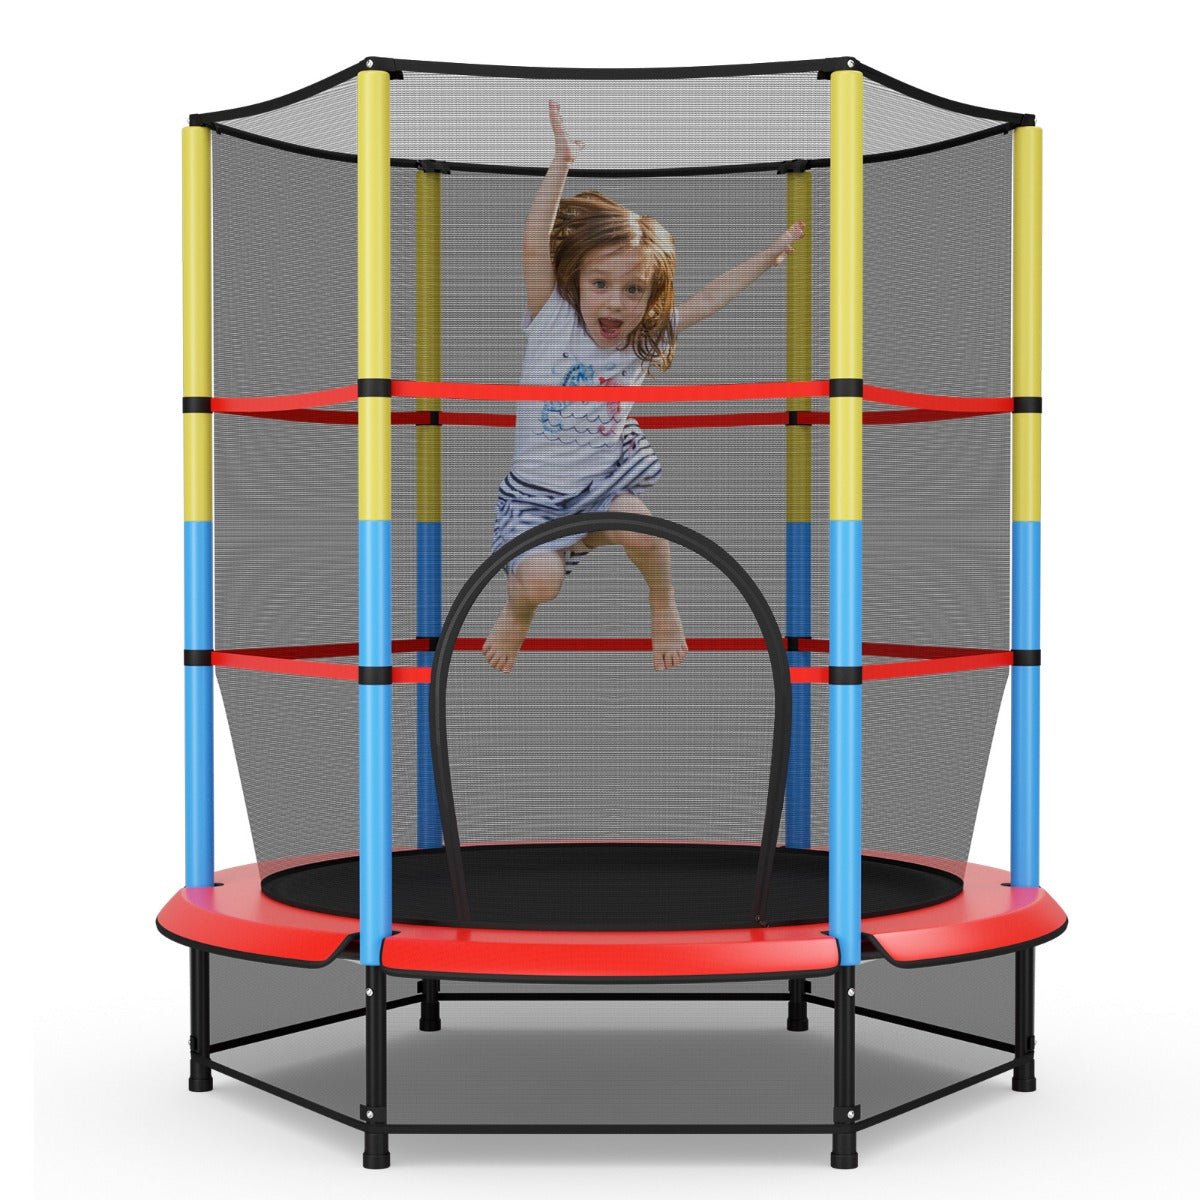 Healthy Playtime: 55 Inches Kids Trampoline with Safety Enclosure